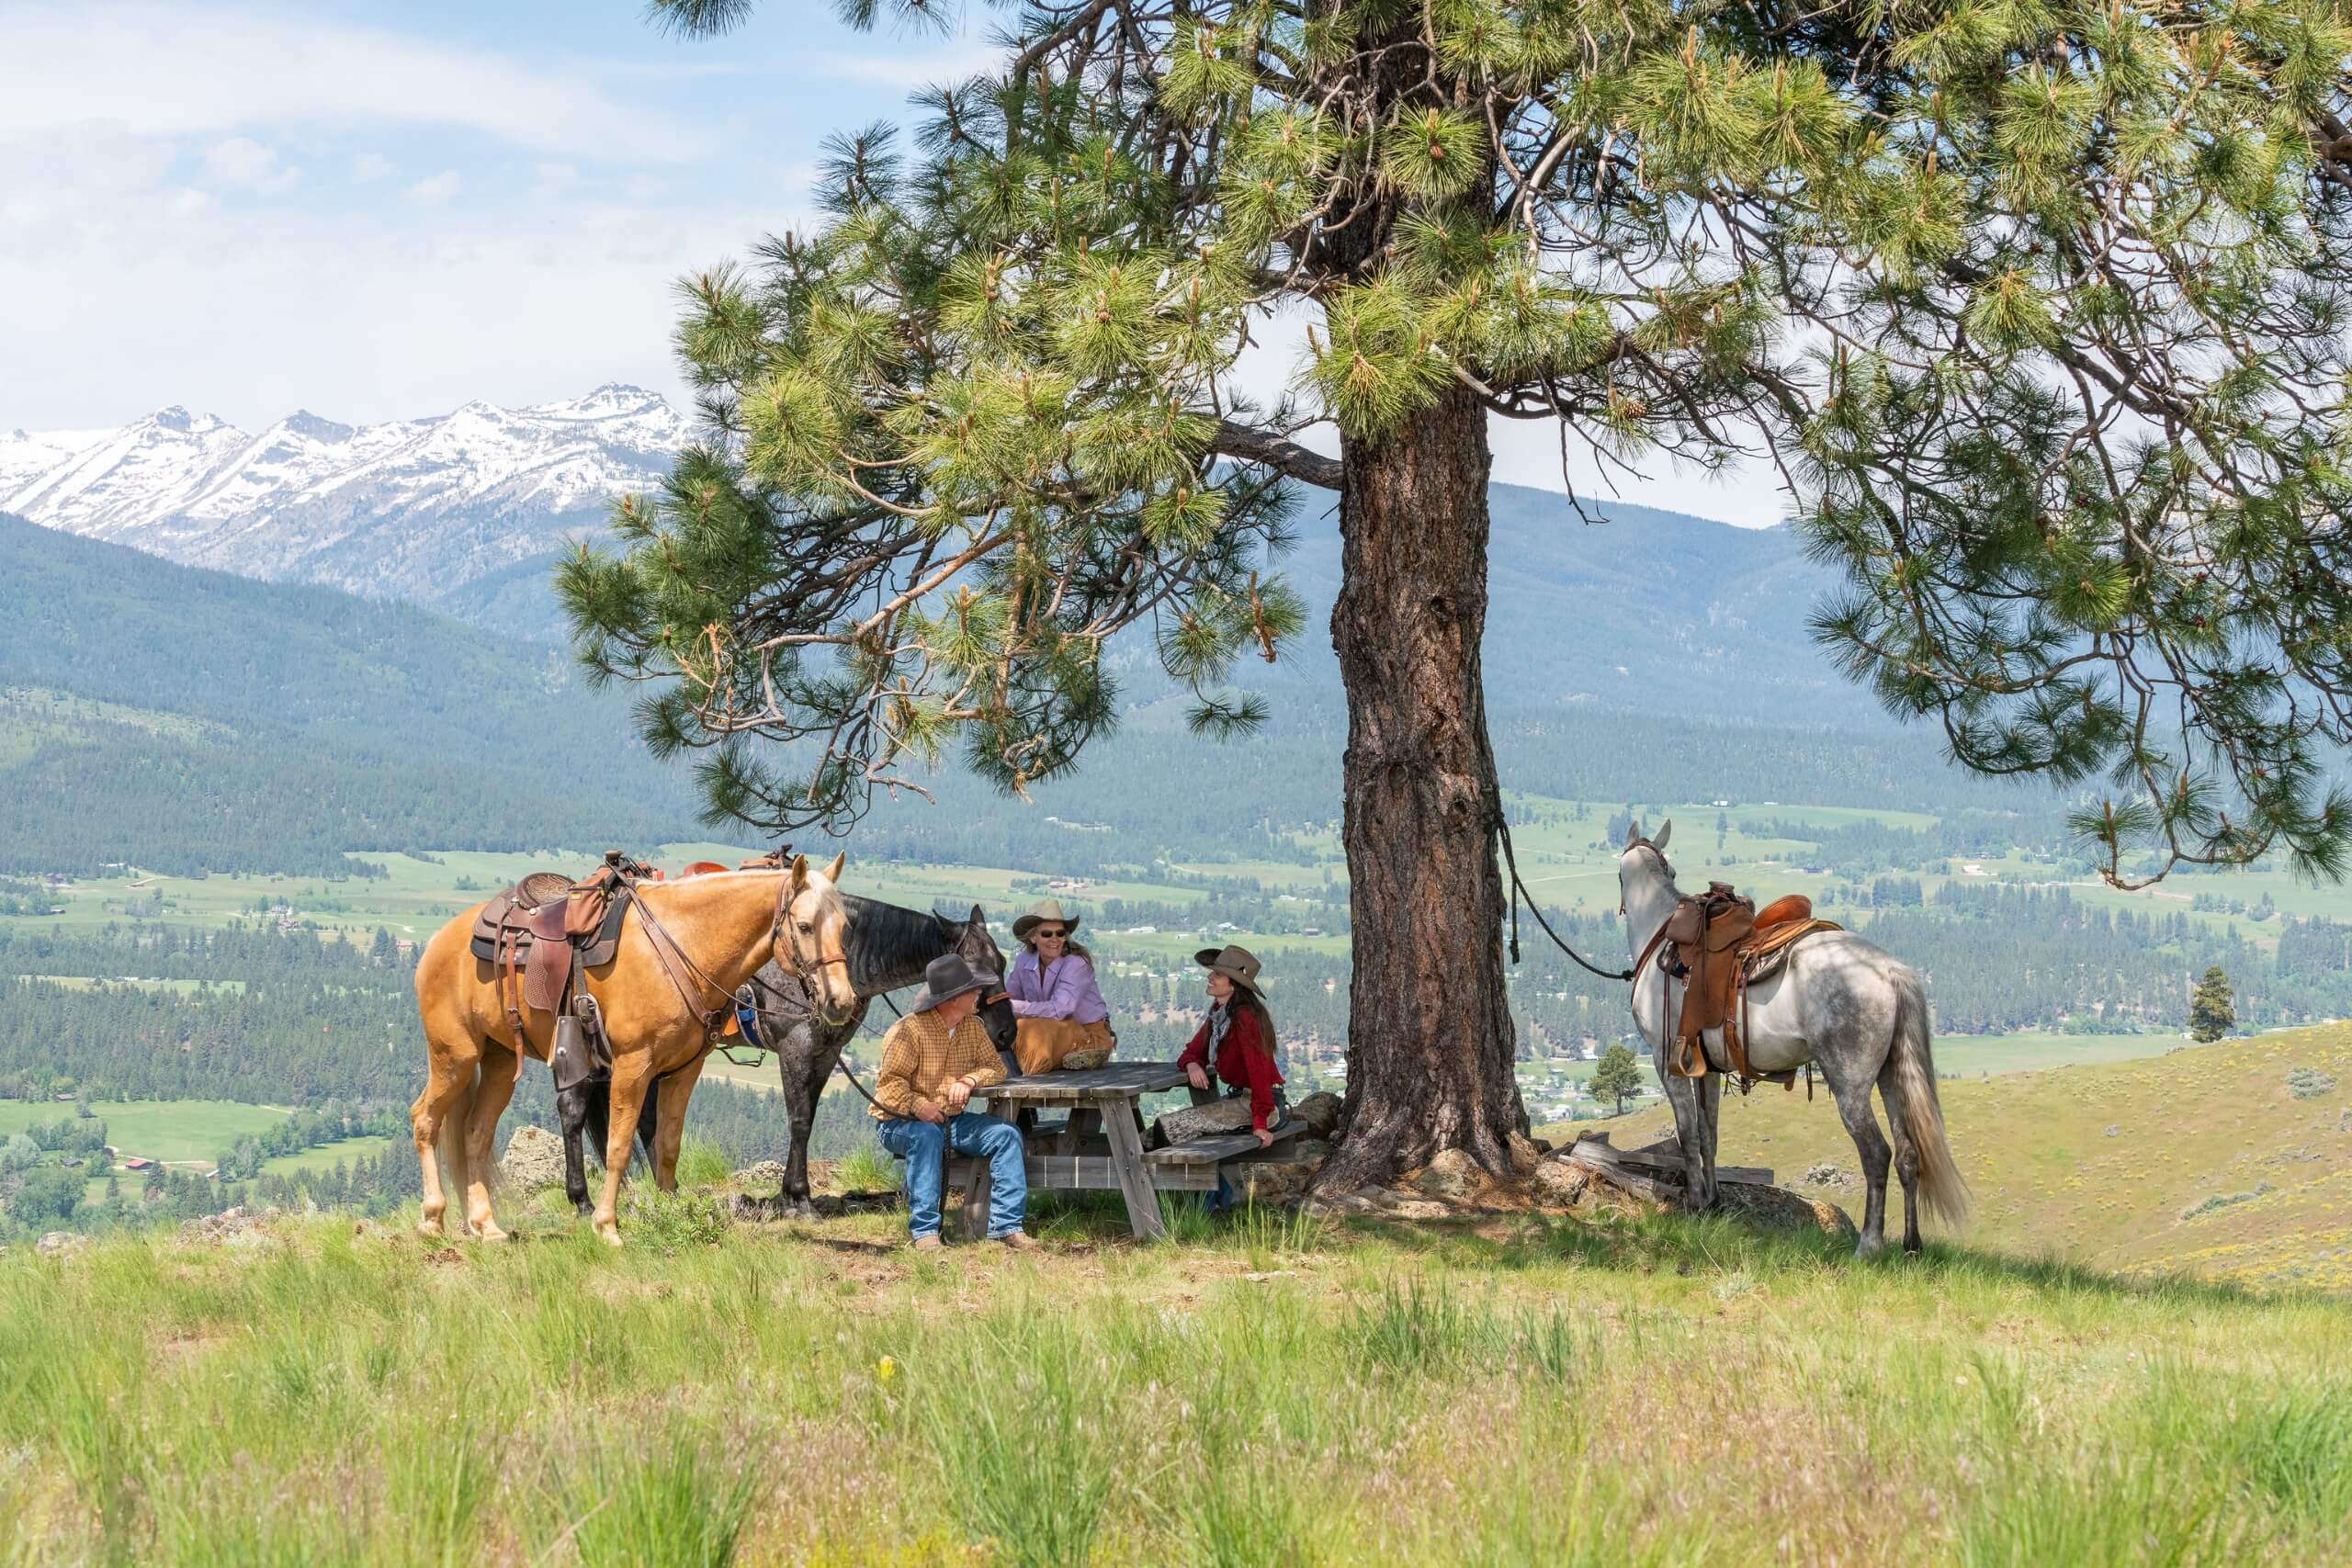 Guests and horses enjoying a lunch at a picnic table on the mountain.